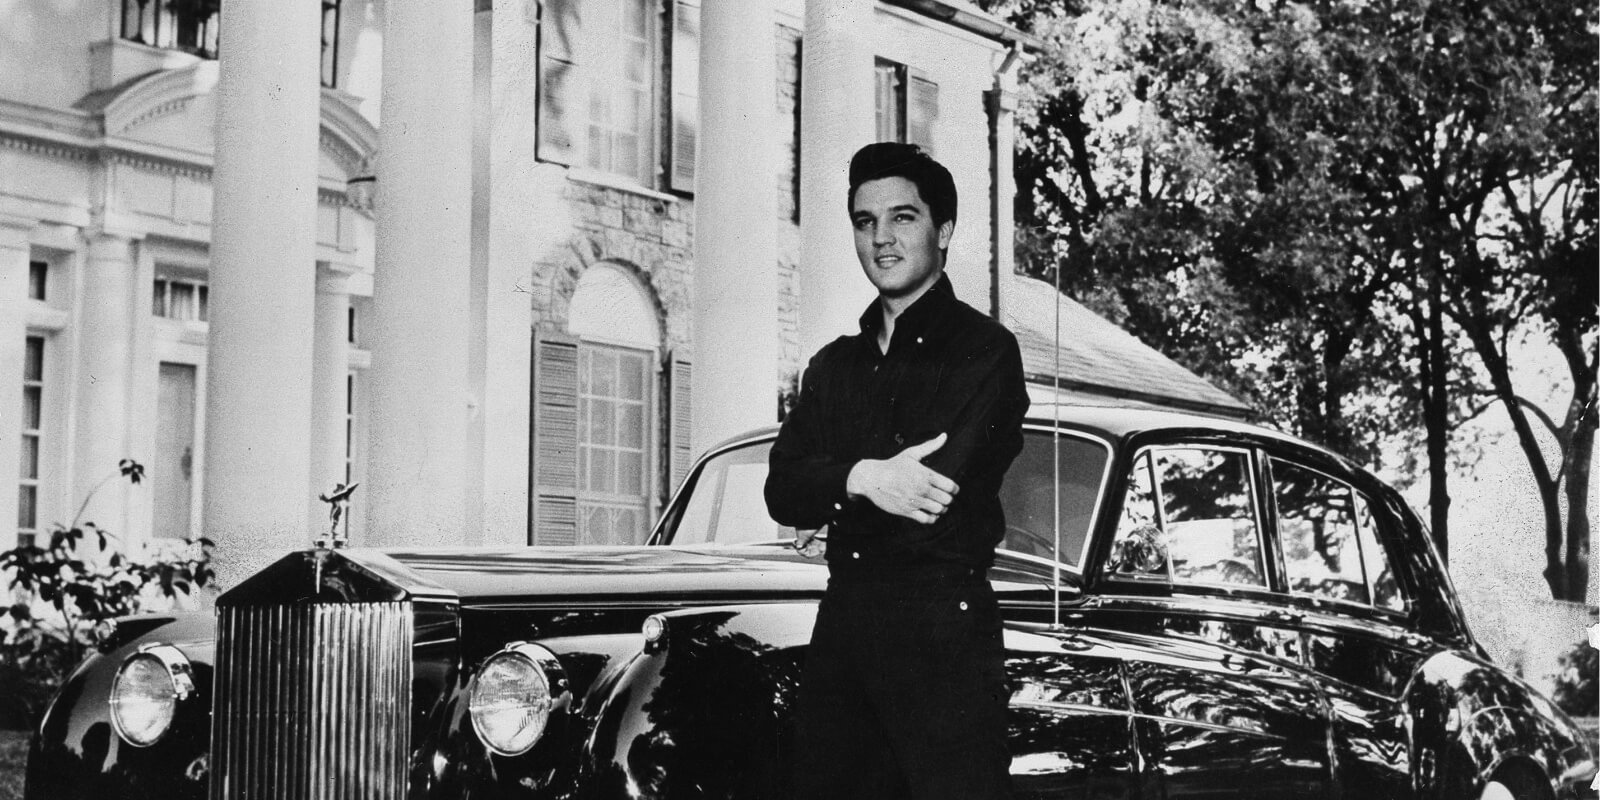 A black and white photo of Elvis Presley taken outside of his home Graceland in Memphis, TN.